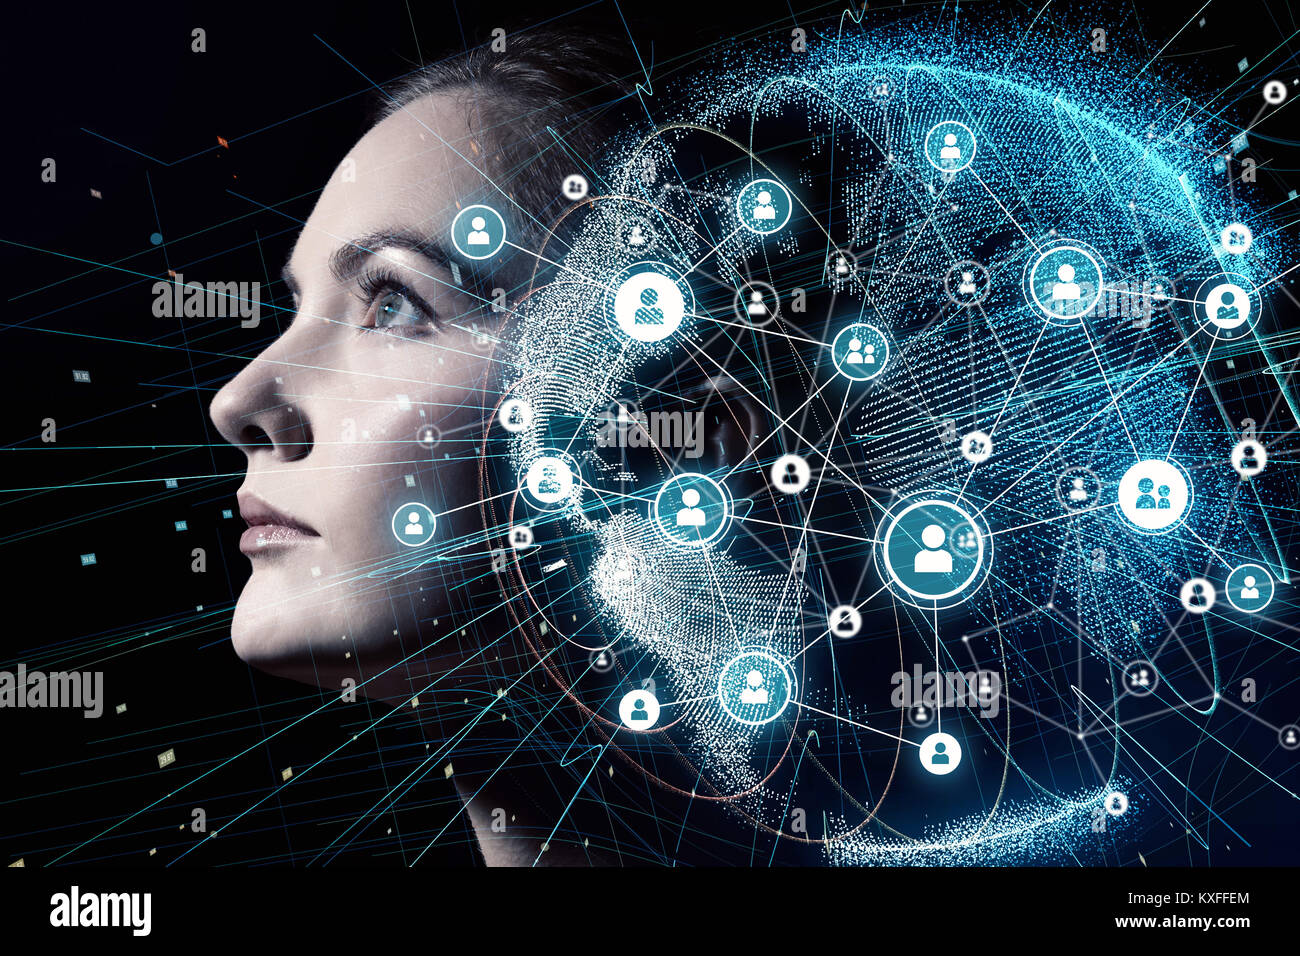 Global communication network and AI (Artificial Intelligence) concept. Stock Photo